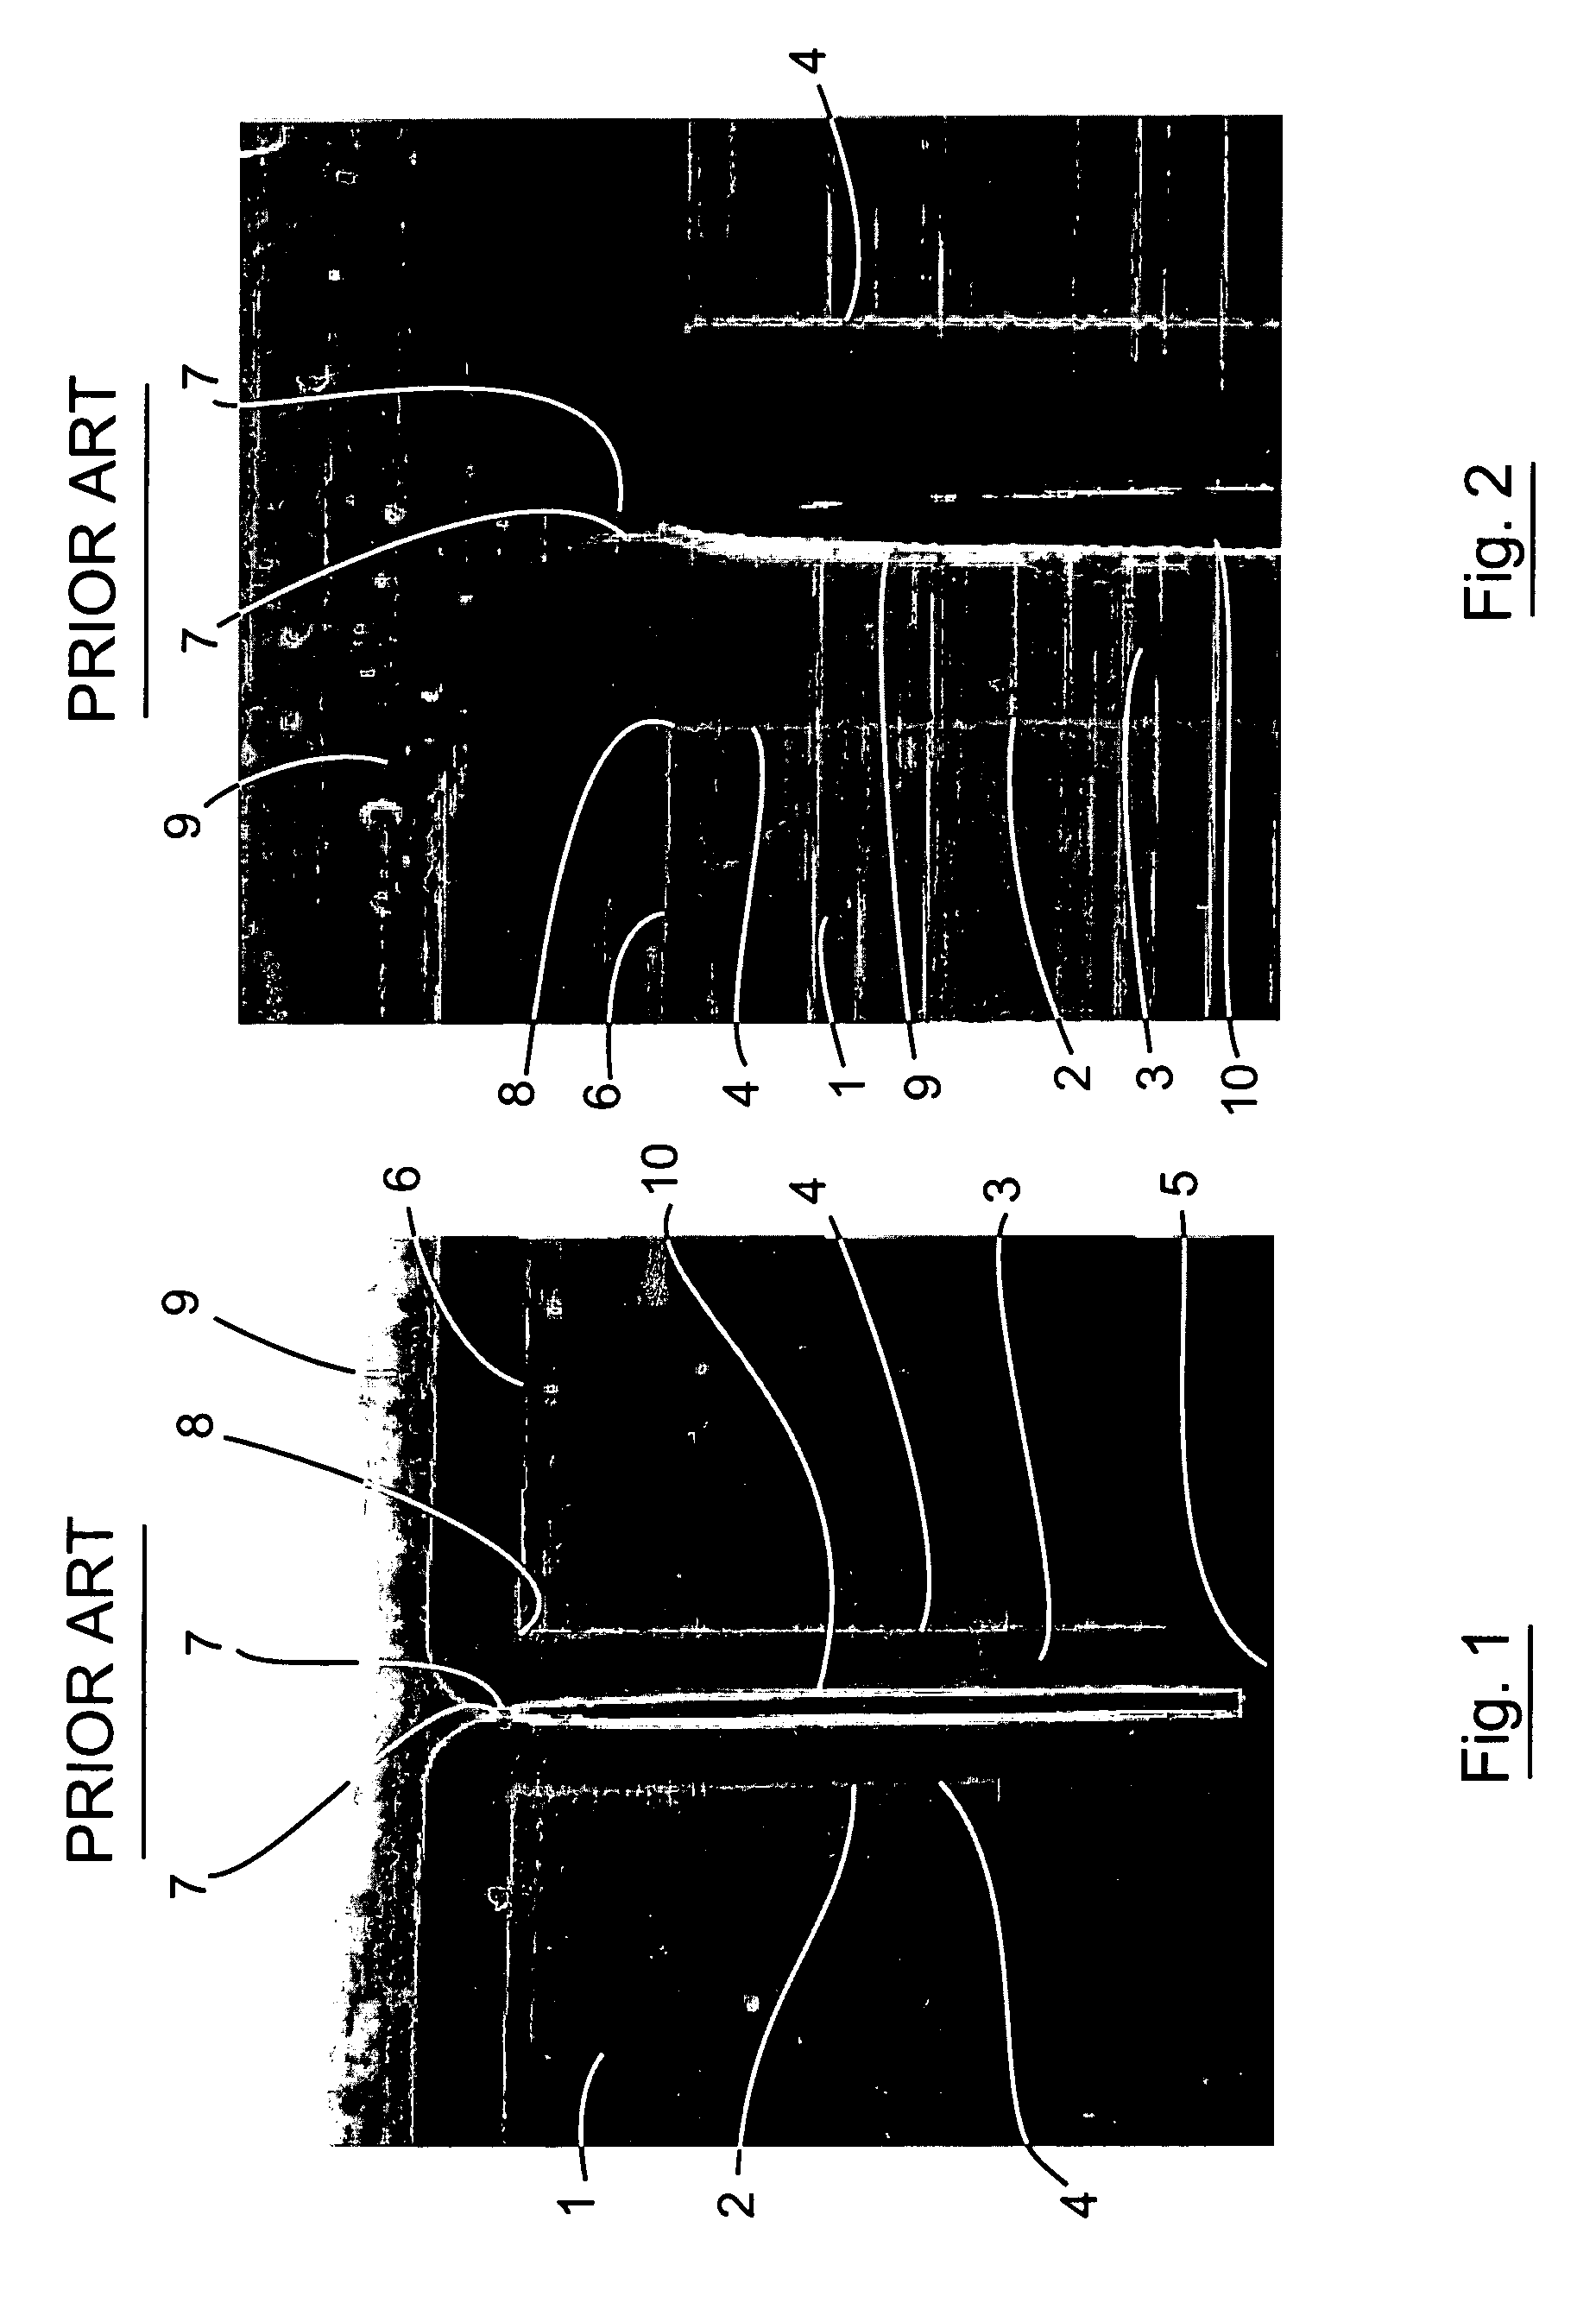 Method for forming a filled trench in a semiconductor layer of a semiconductor substrate, and a semiconductor substrate with a semiconductor layer having a filled trench therein